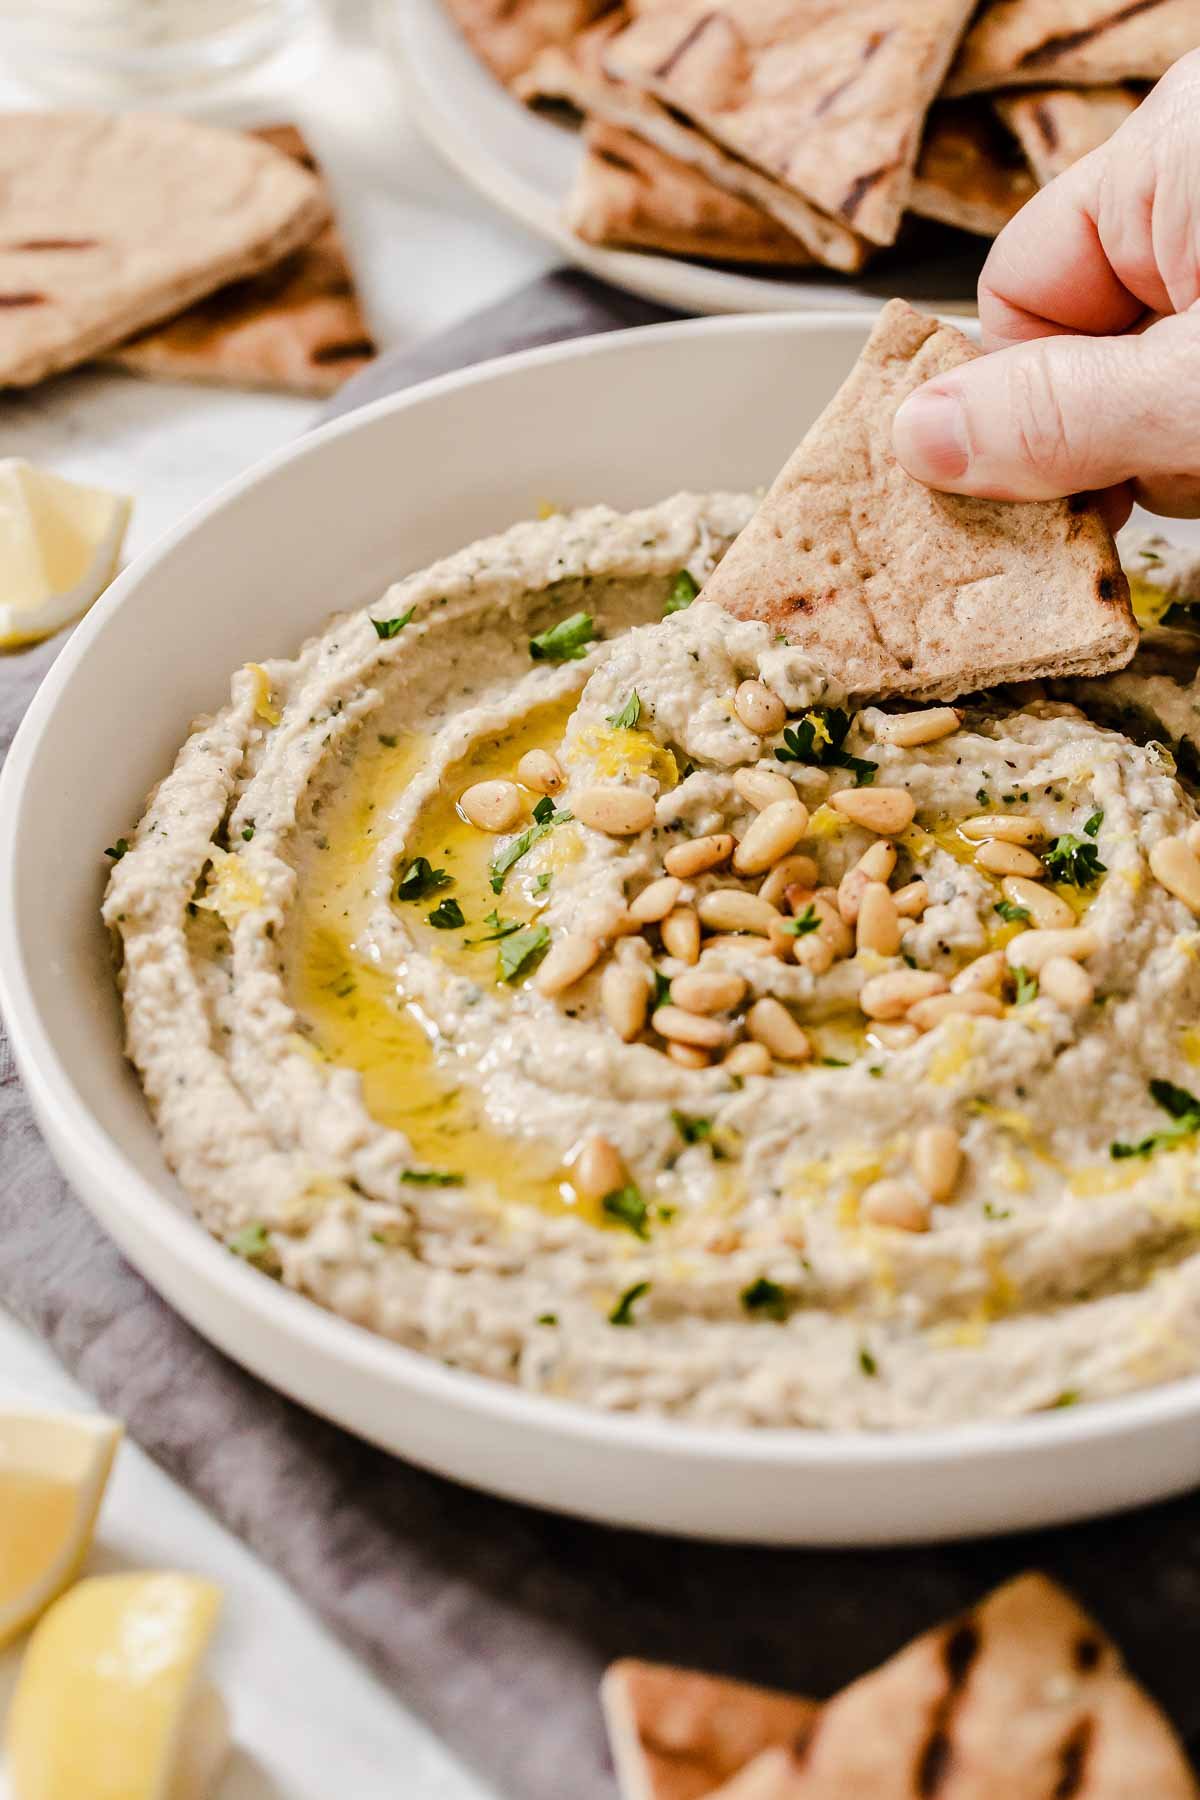 Hand dipping pita triangle into dip with olive oil and pine nuts on top.